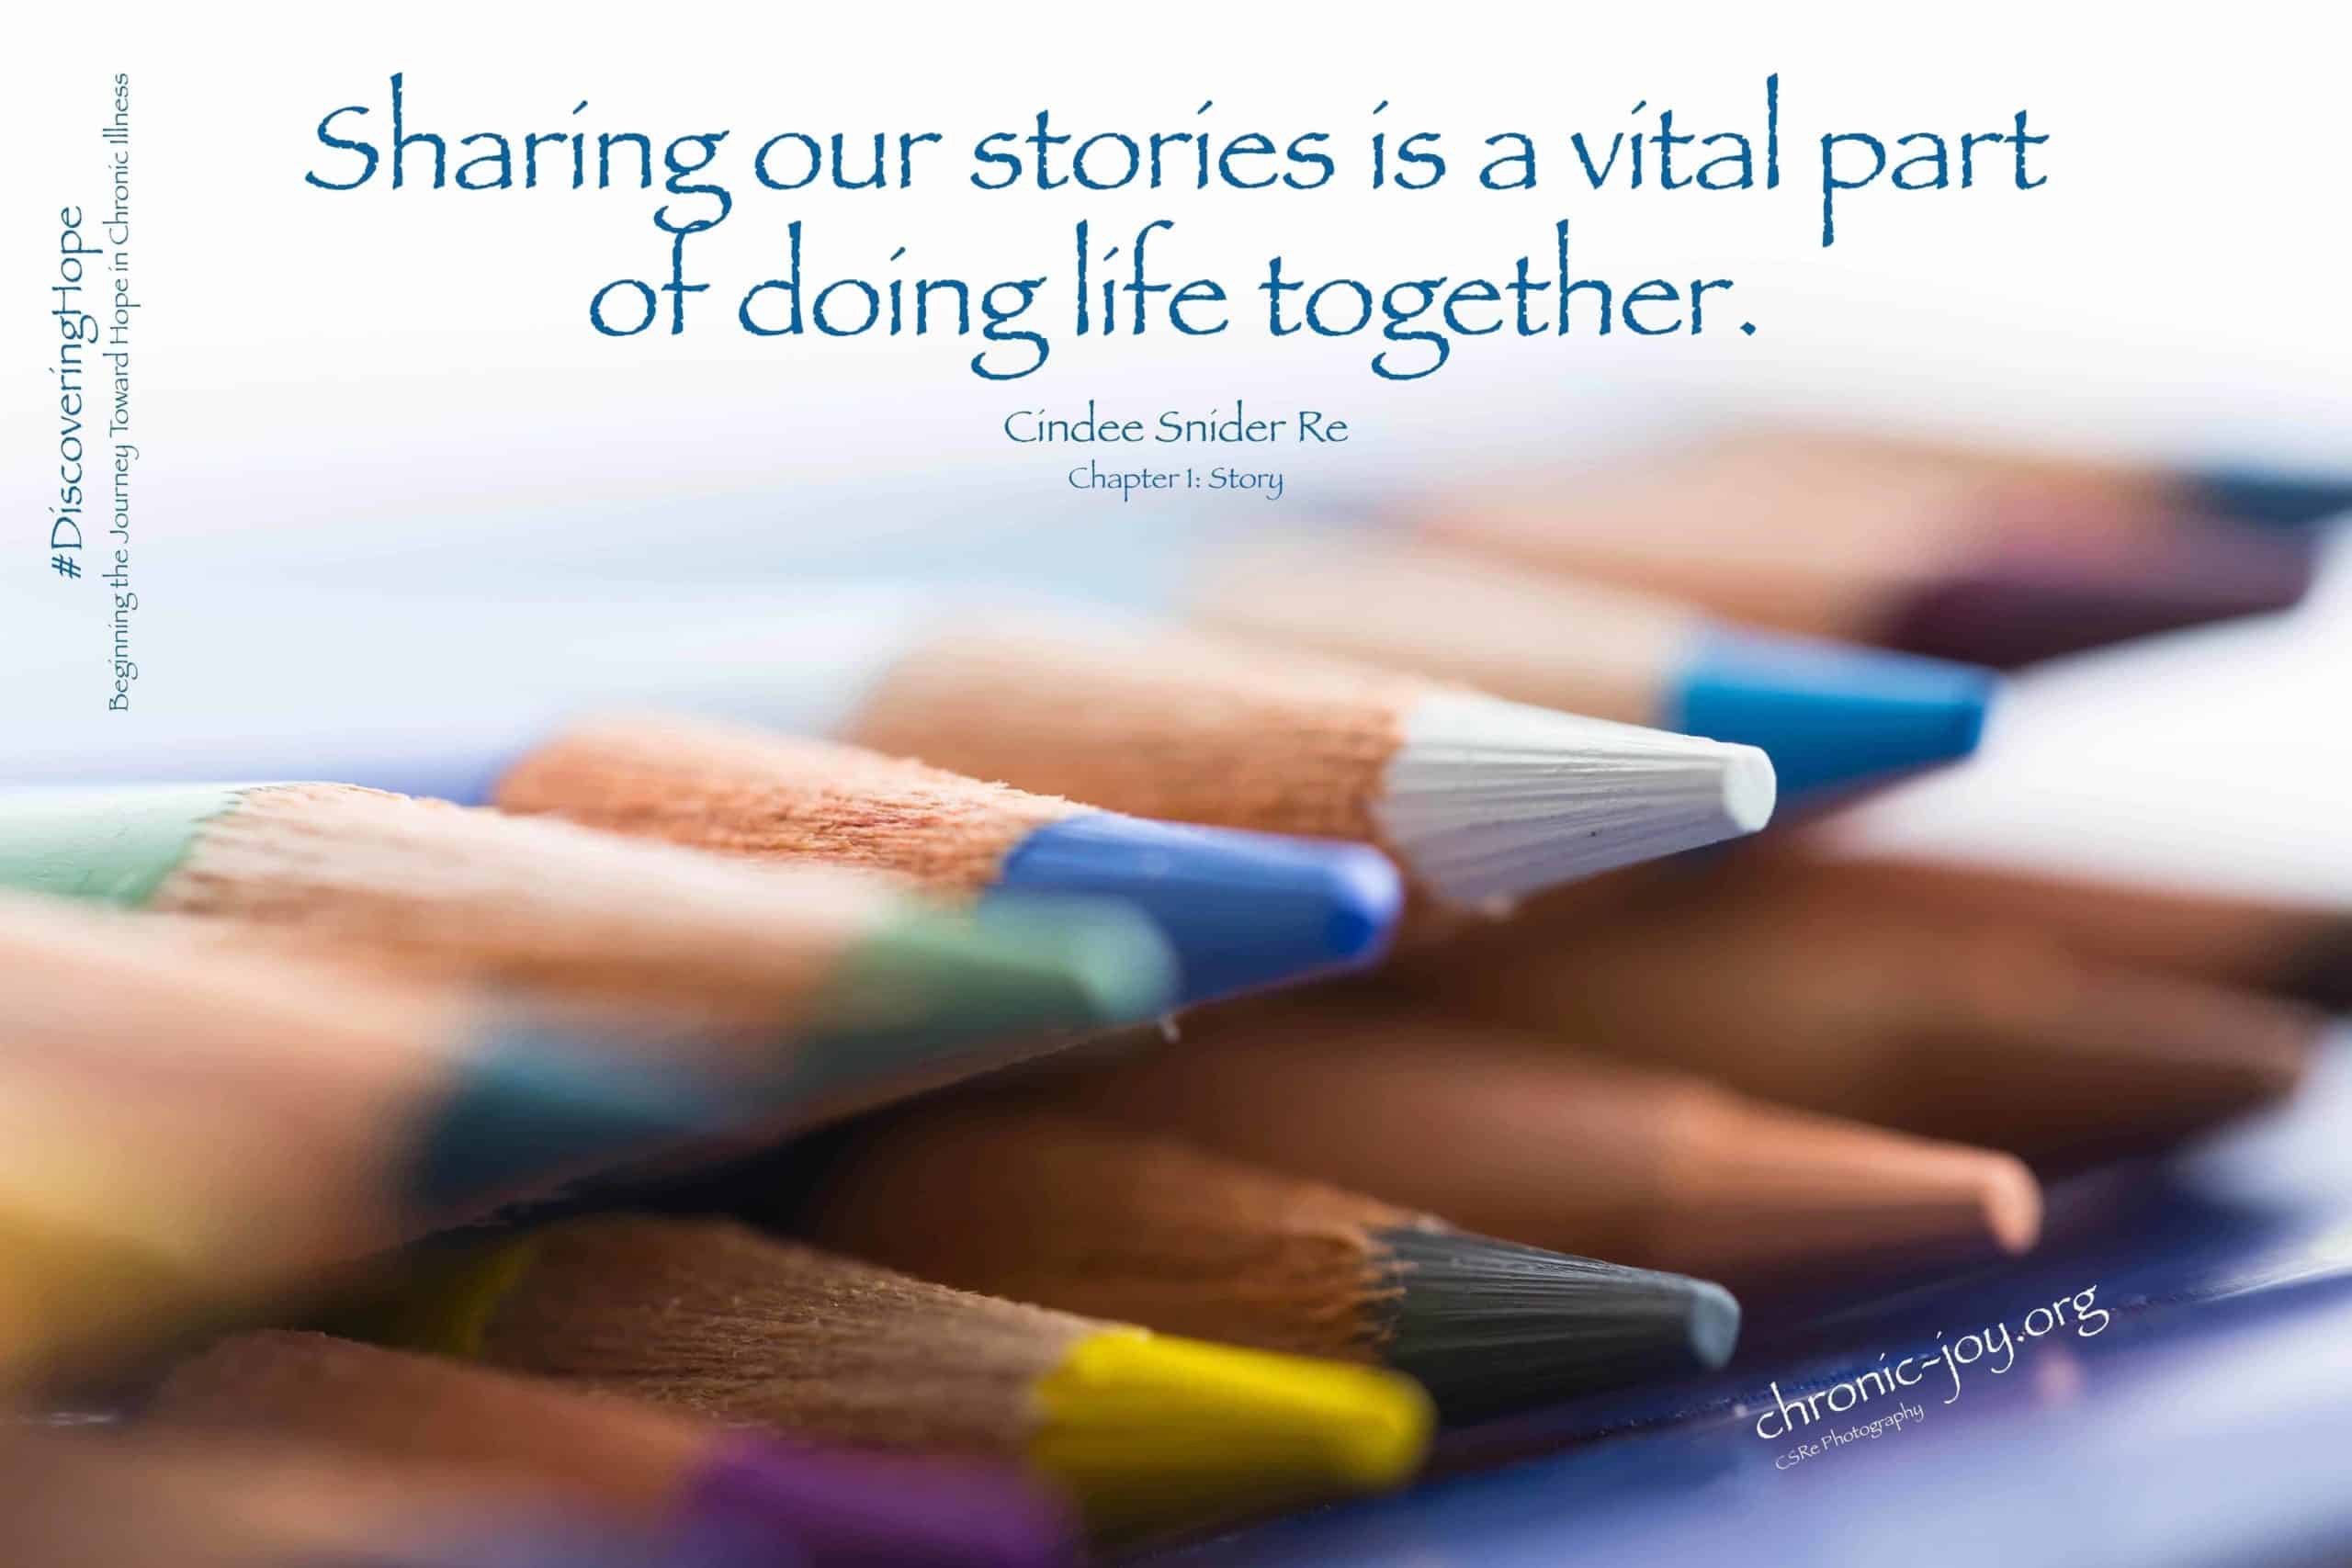 Sharing our stories is vital